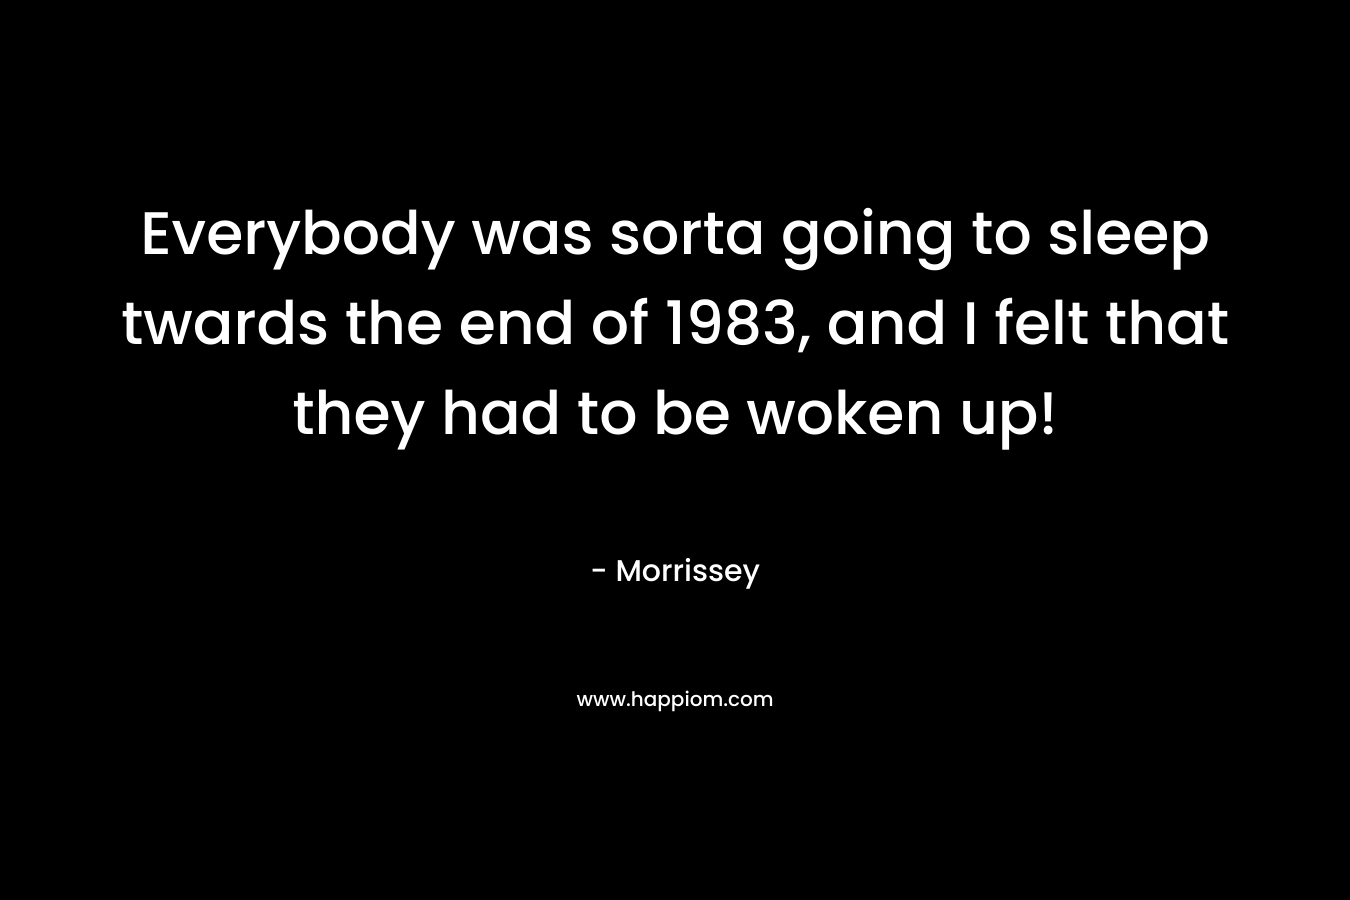 Everybody was sorta going to sleep twards the end of 1983, and I felt that they had to be woken up!